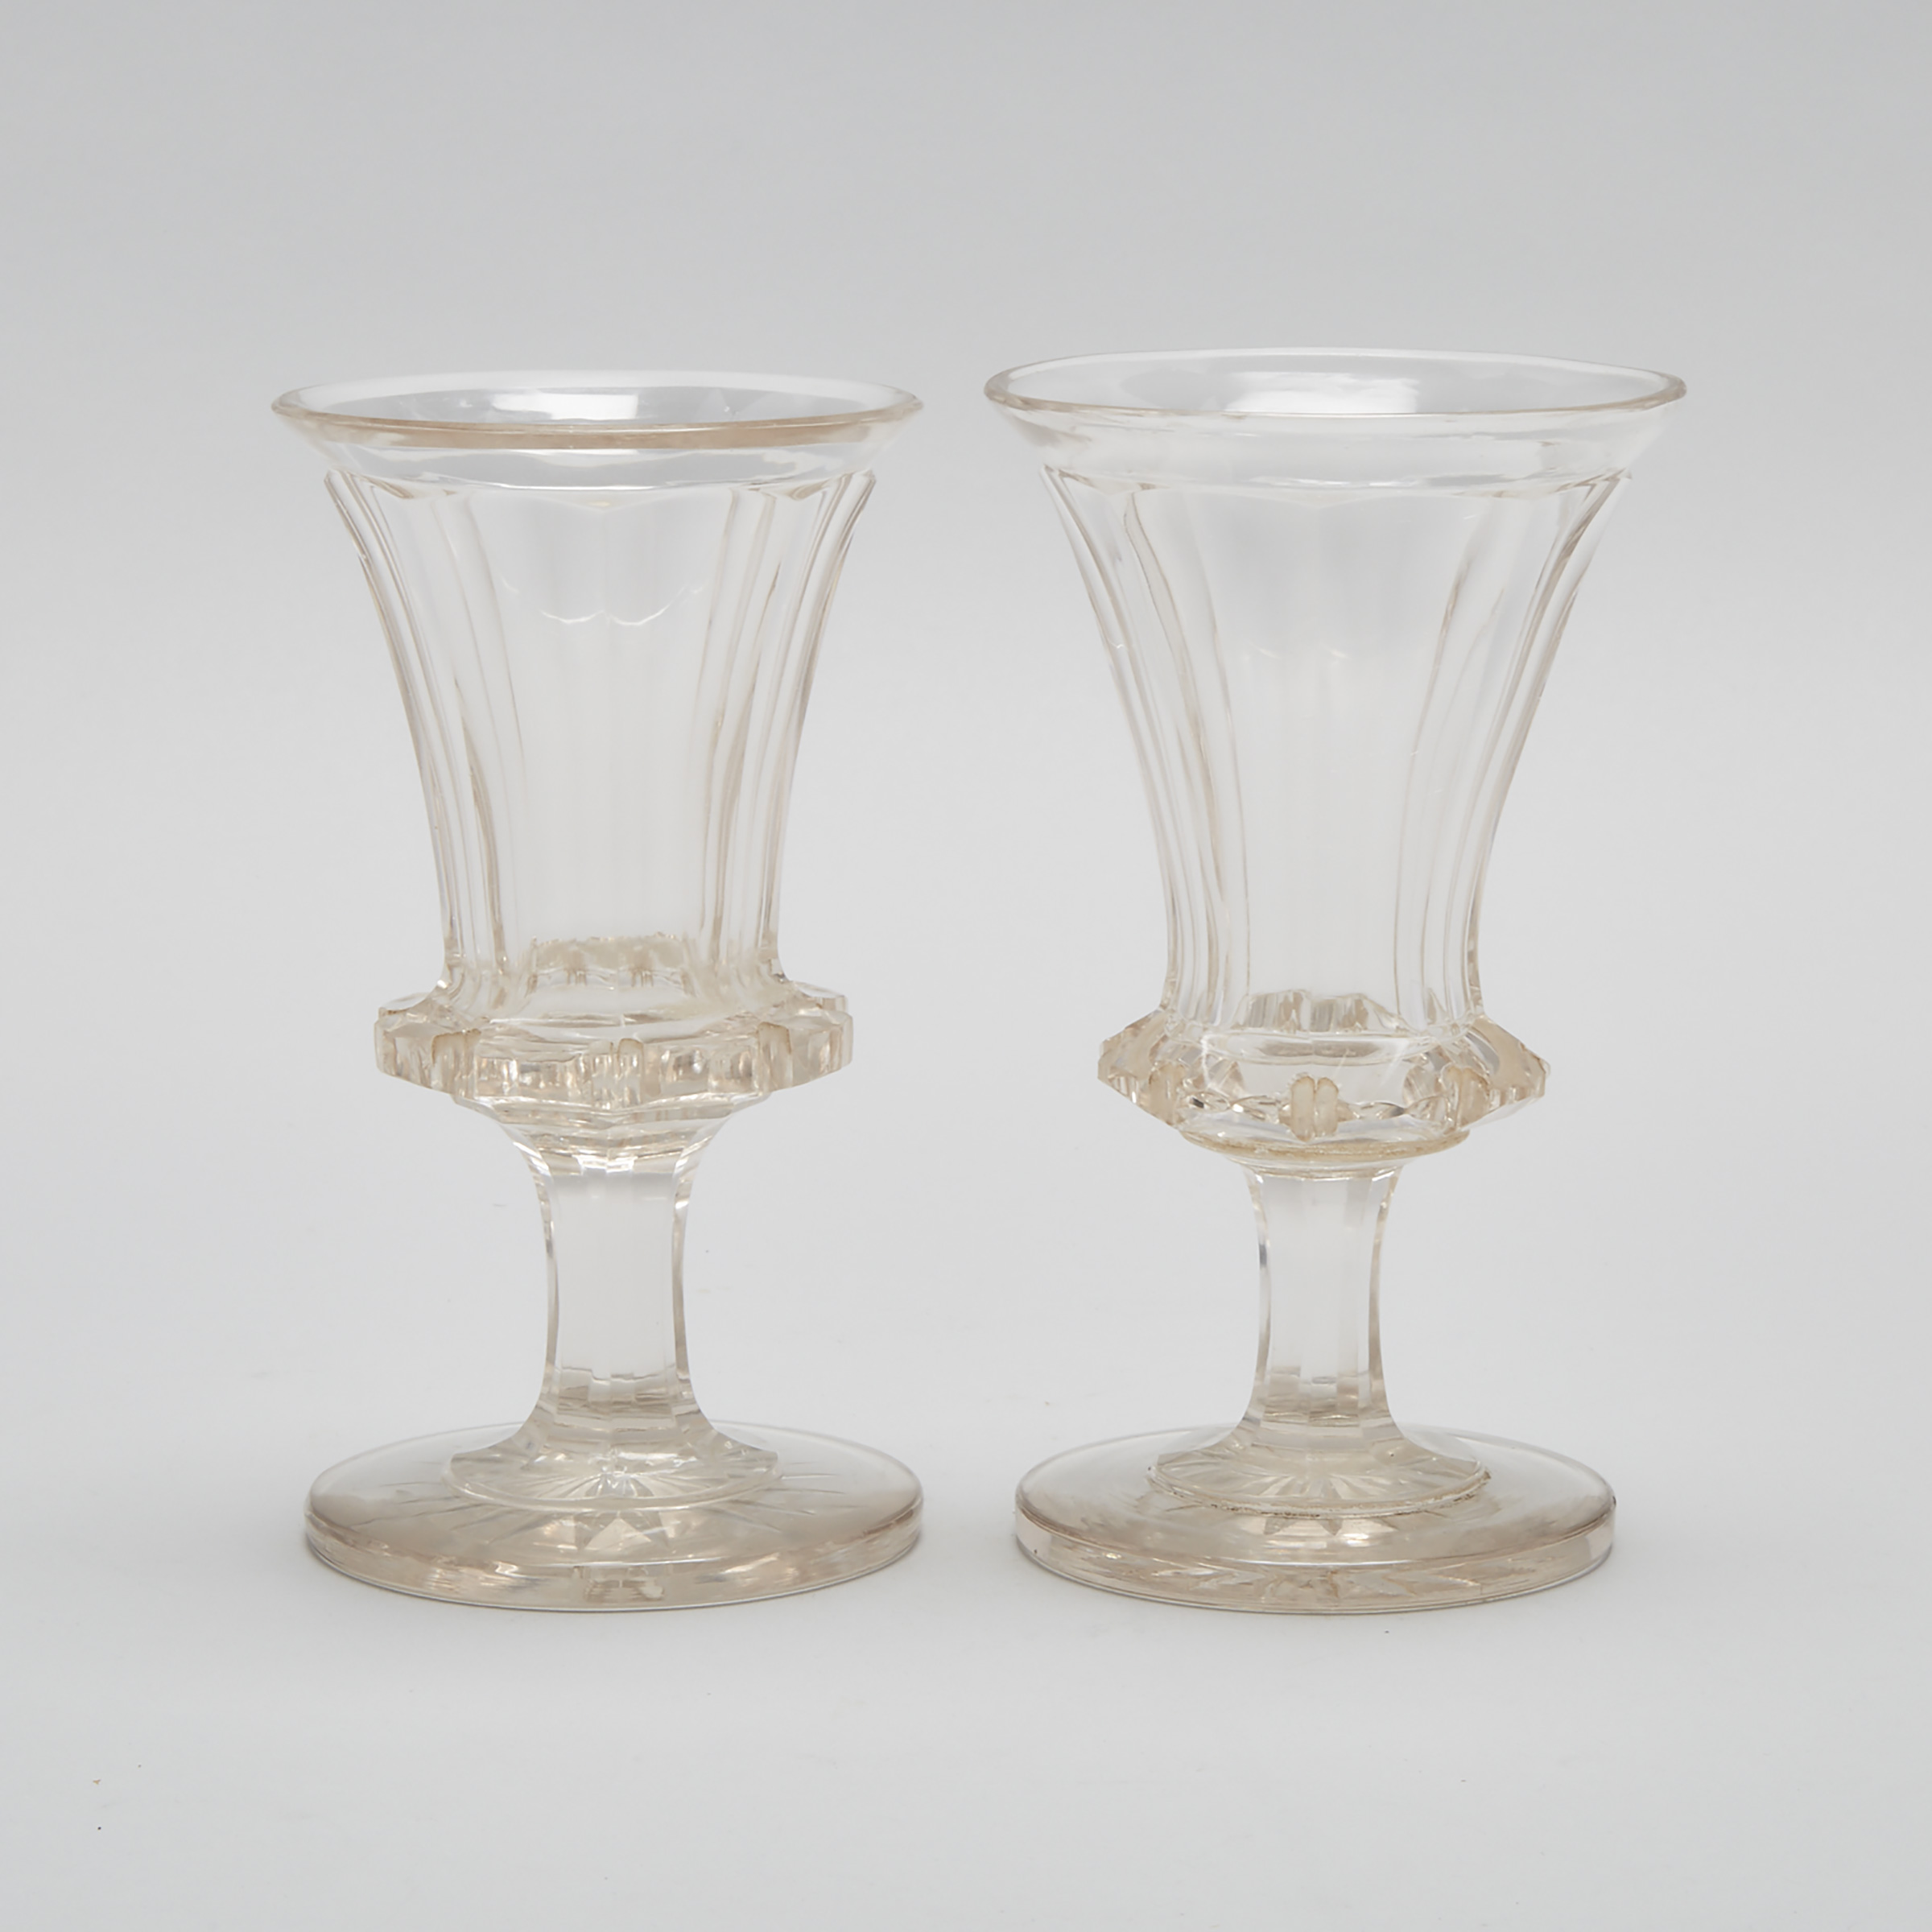 Pair of Bohemian Cut Glass Goblets, mid-19th century